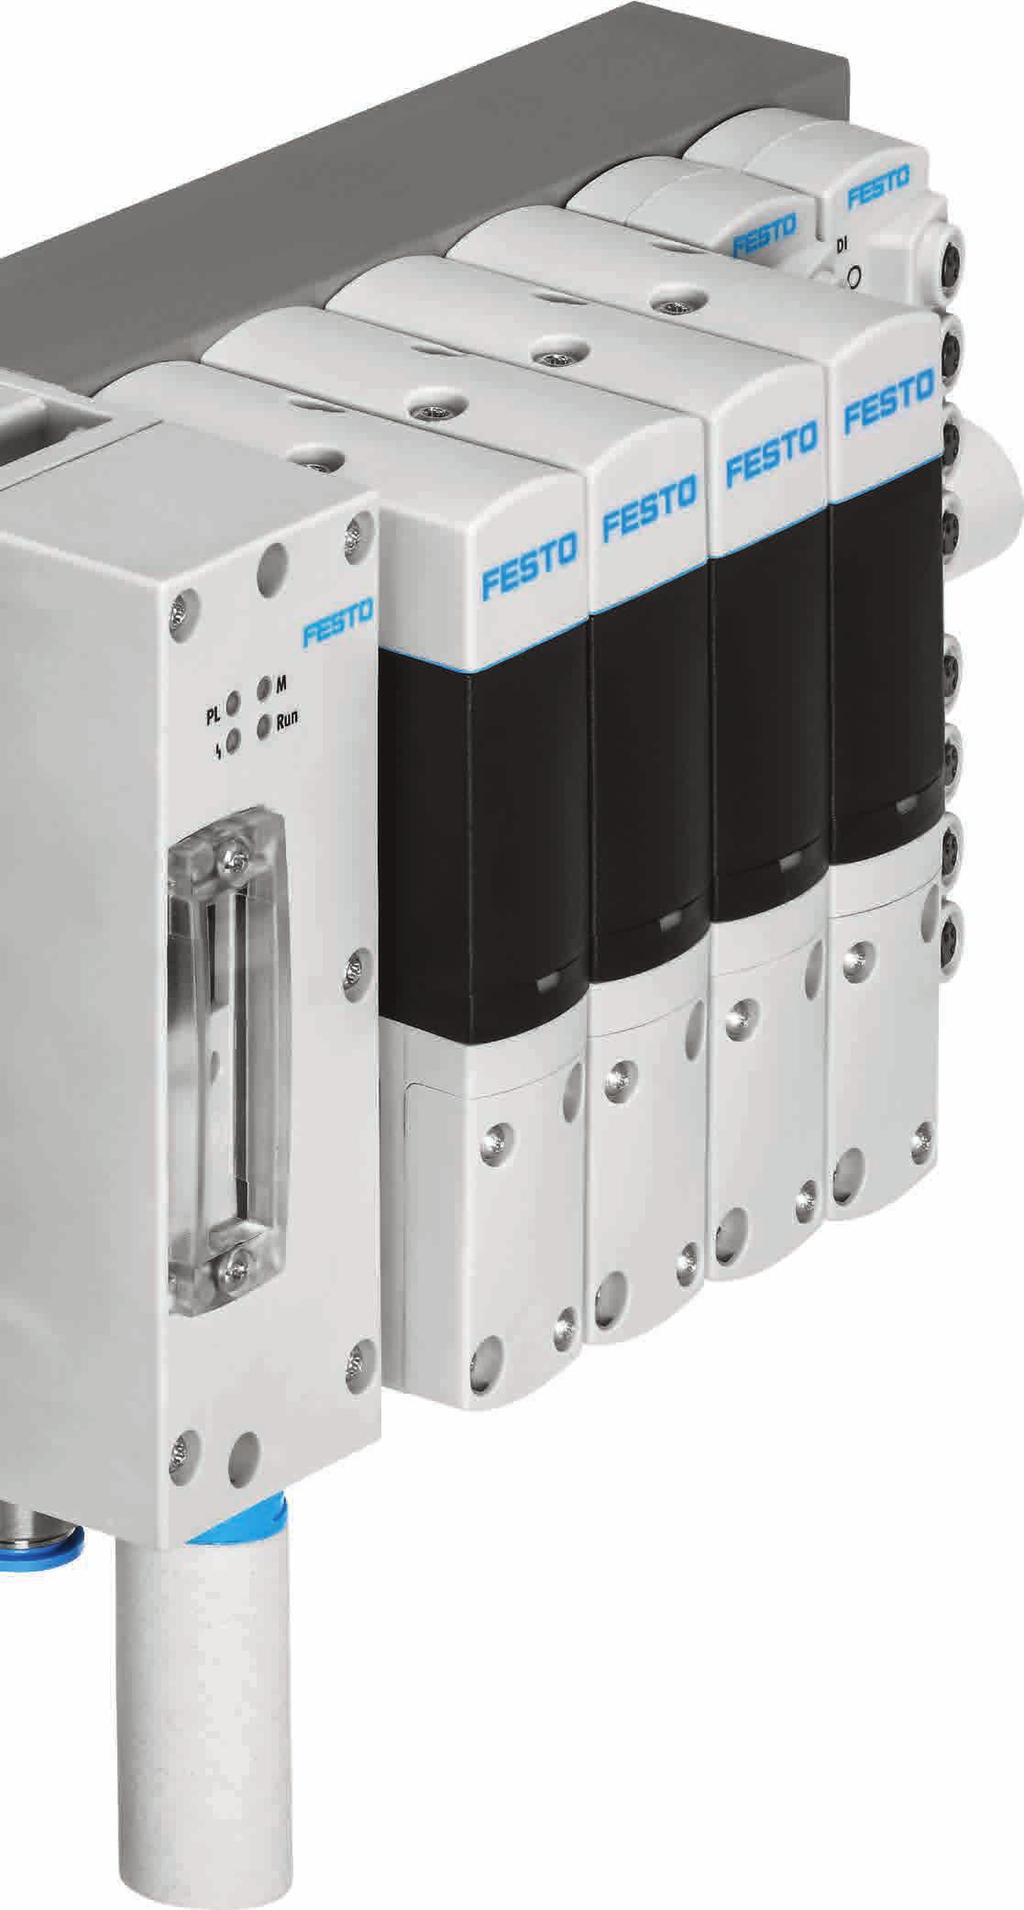 Input module Up to 16 analogue or digital inputs for direct control applications such as Soft Stop. The necessary data is recorded and transmitted by sensors mounted directly on the actuator.